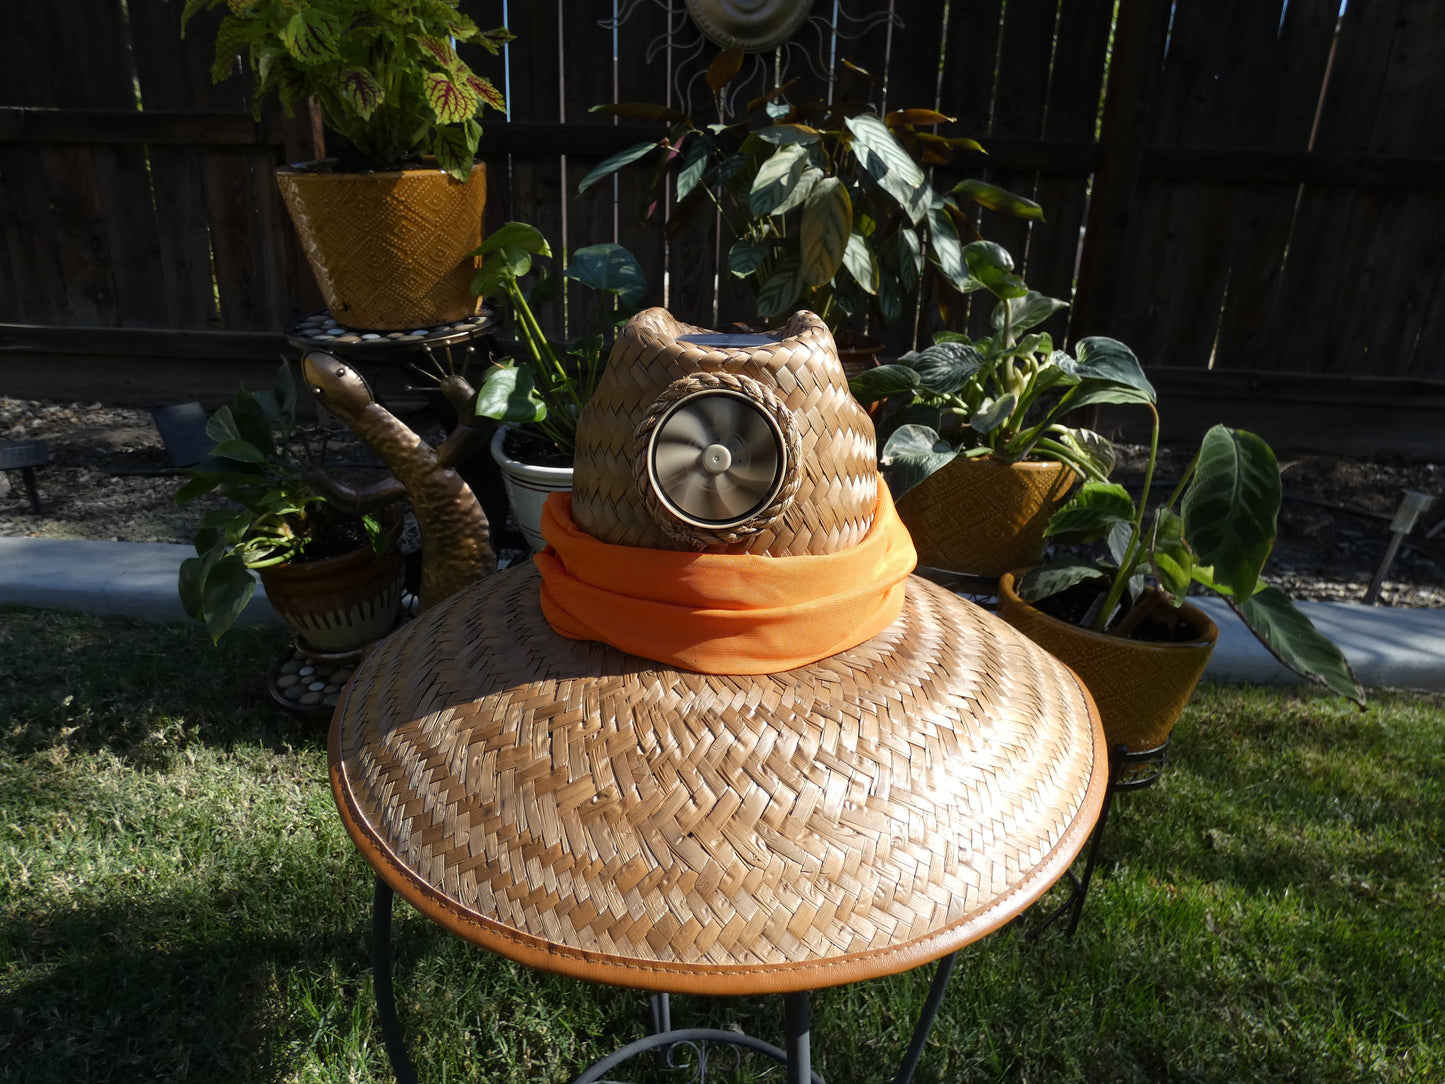 Lady's Thurman with Scarf Solar Hat - Sun Hat with Fan, Extra Large